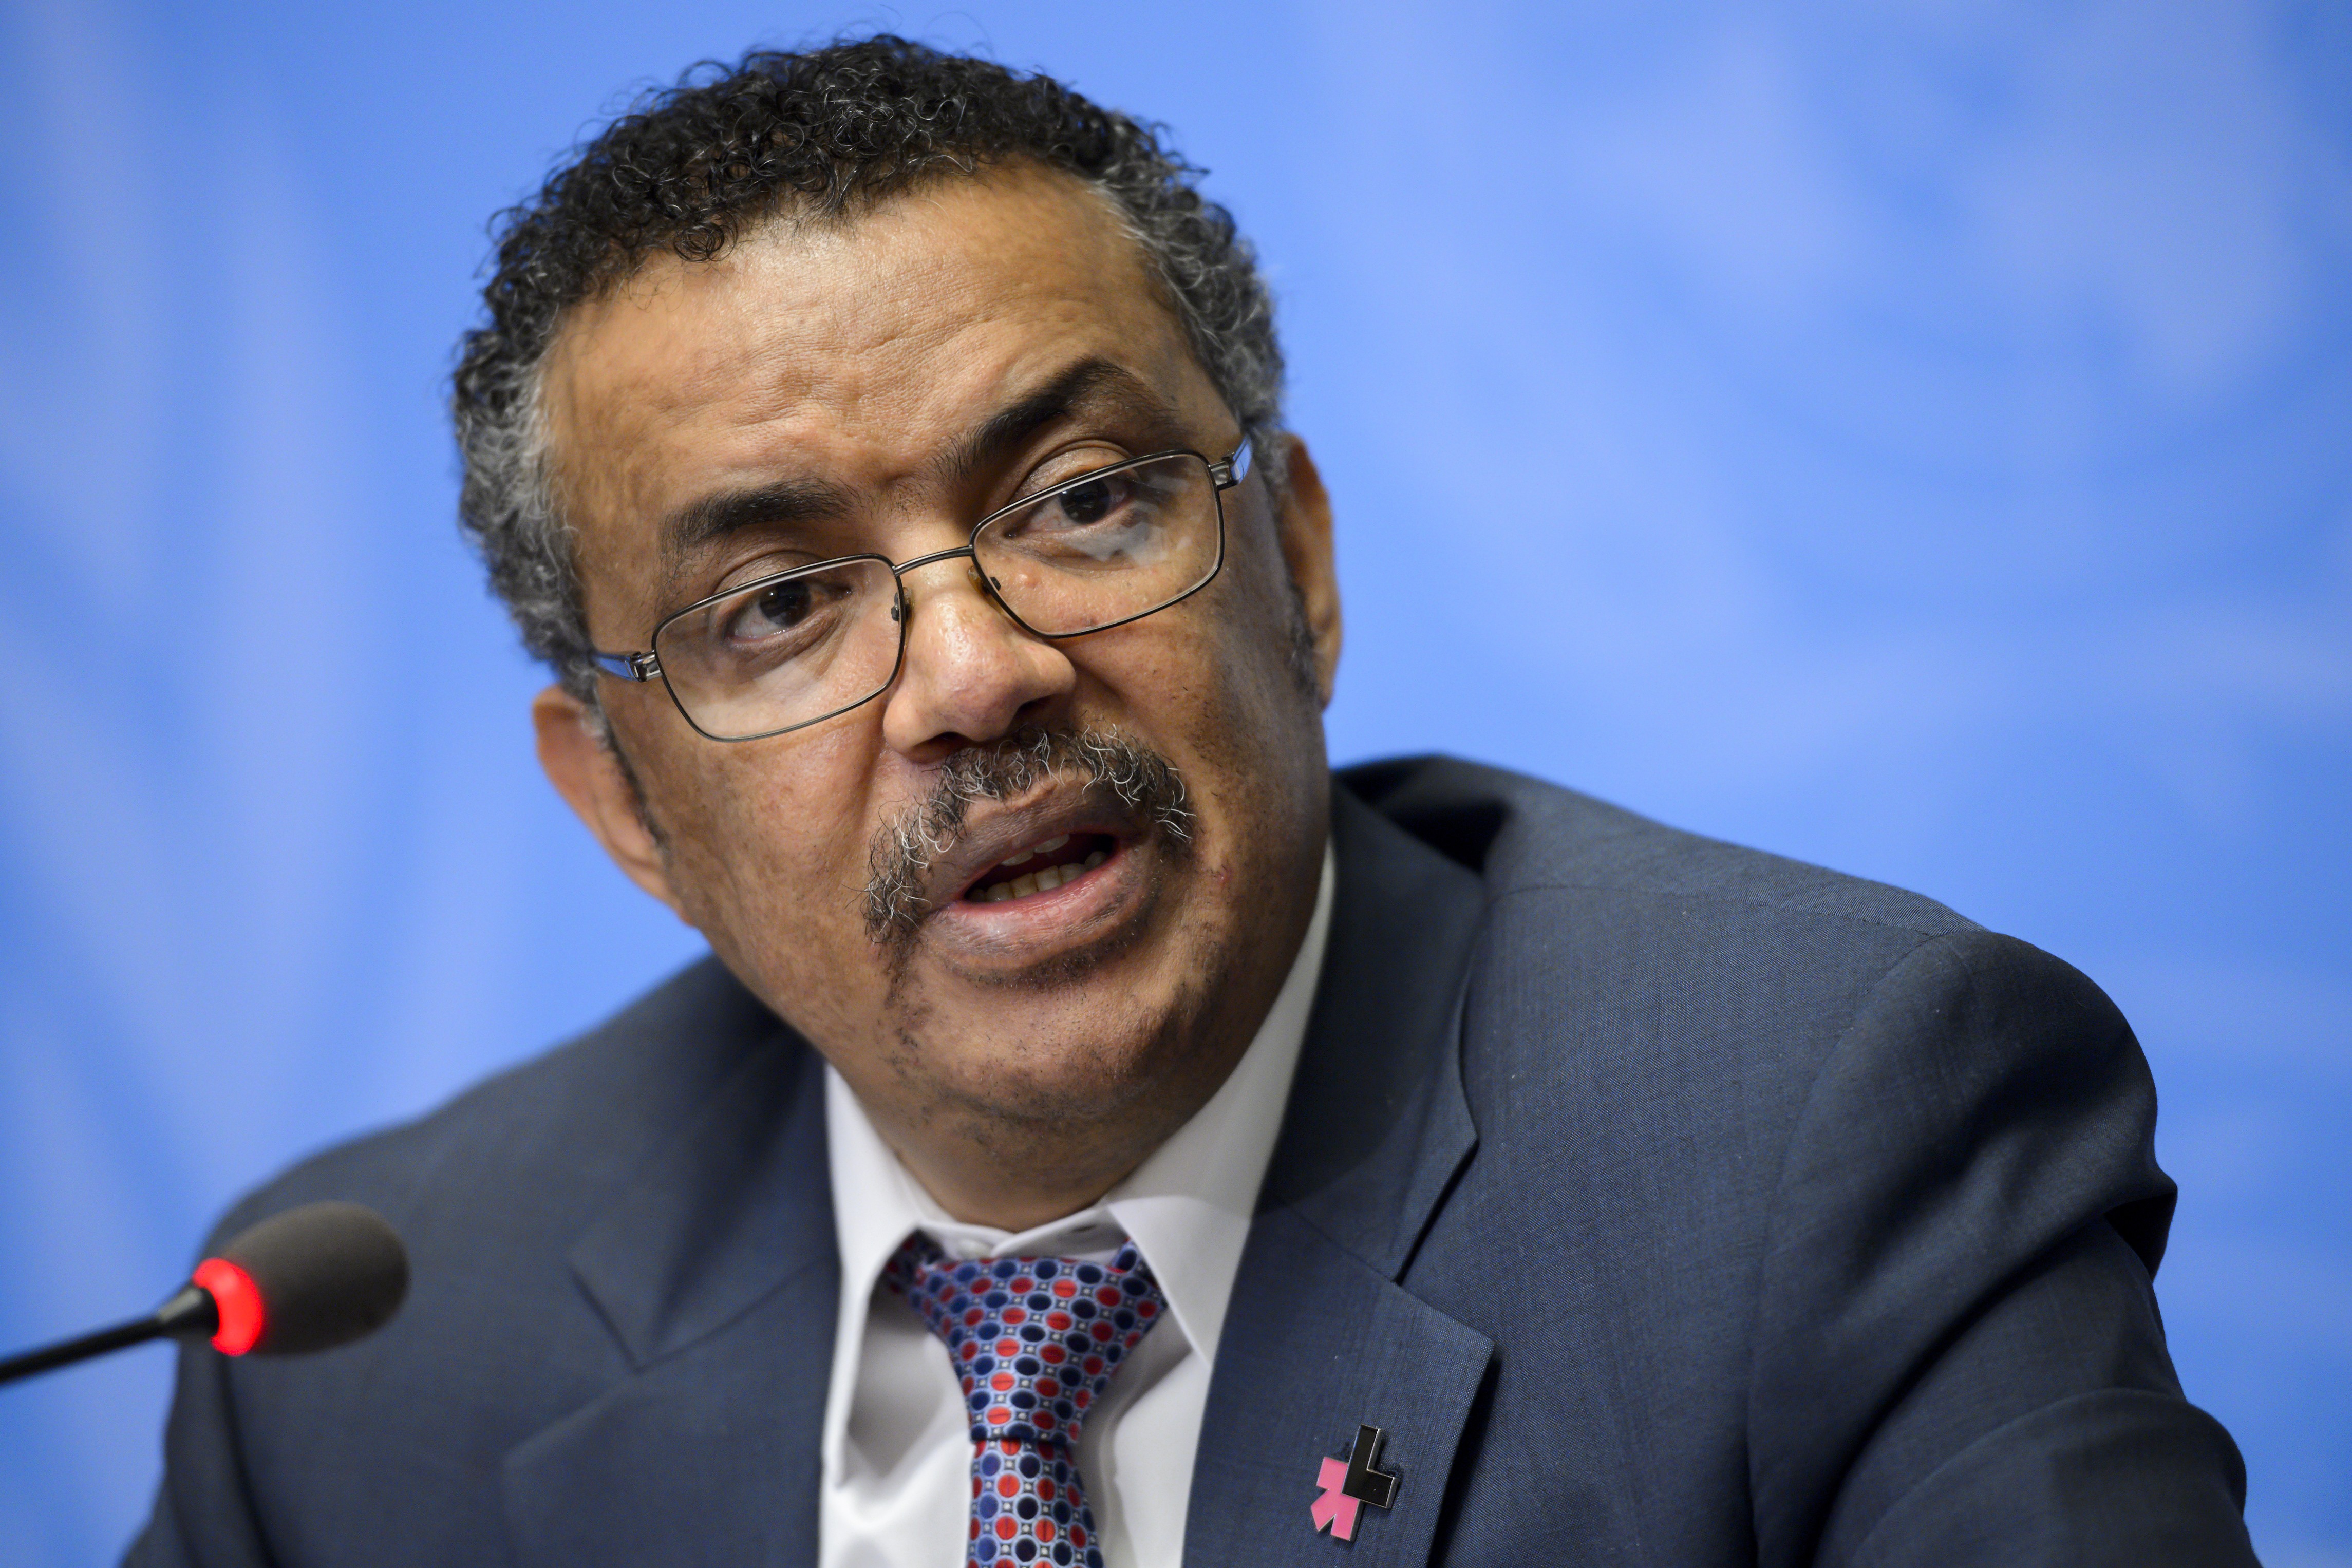 Ethiopian Minister of Foreign Affairs Tedros Adhanom Ghebreyesus attends a press conference launching his candidacy to the post of Director General of the World Health Organization (WHO), on the sidelines of the WHO's annual assembly, on May 24, 2016, in Geneva. Delegates from 194 member-states gather for the second day of the WHO's annual assembly, with the UN agency's chief Margaret Chan warning in an opening address that the world was not prepared to cope with a rising threat from infectious diseases. / AFP / FABRICE COFFRINI        (Photo credit should read FABRICE COFFRINI/AFP/Getty Images)